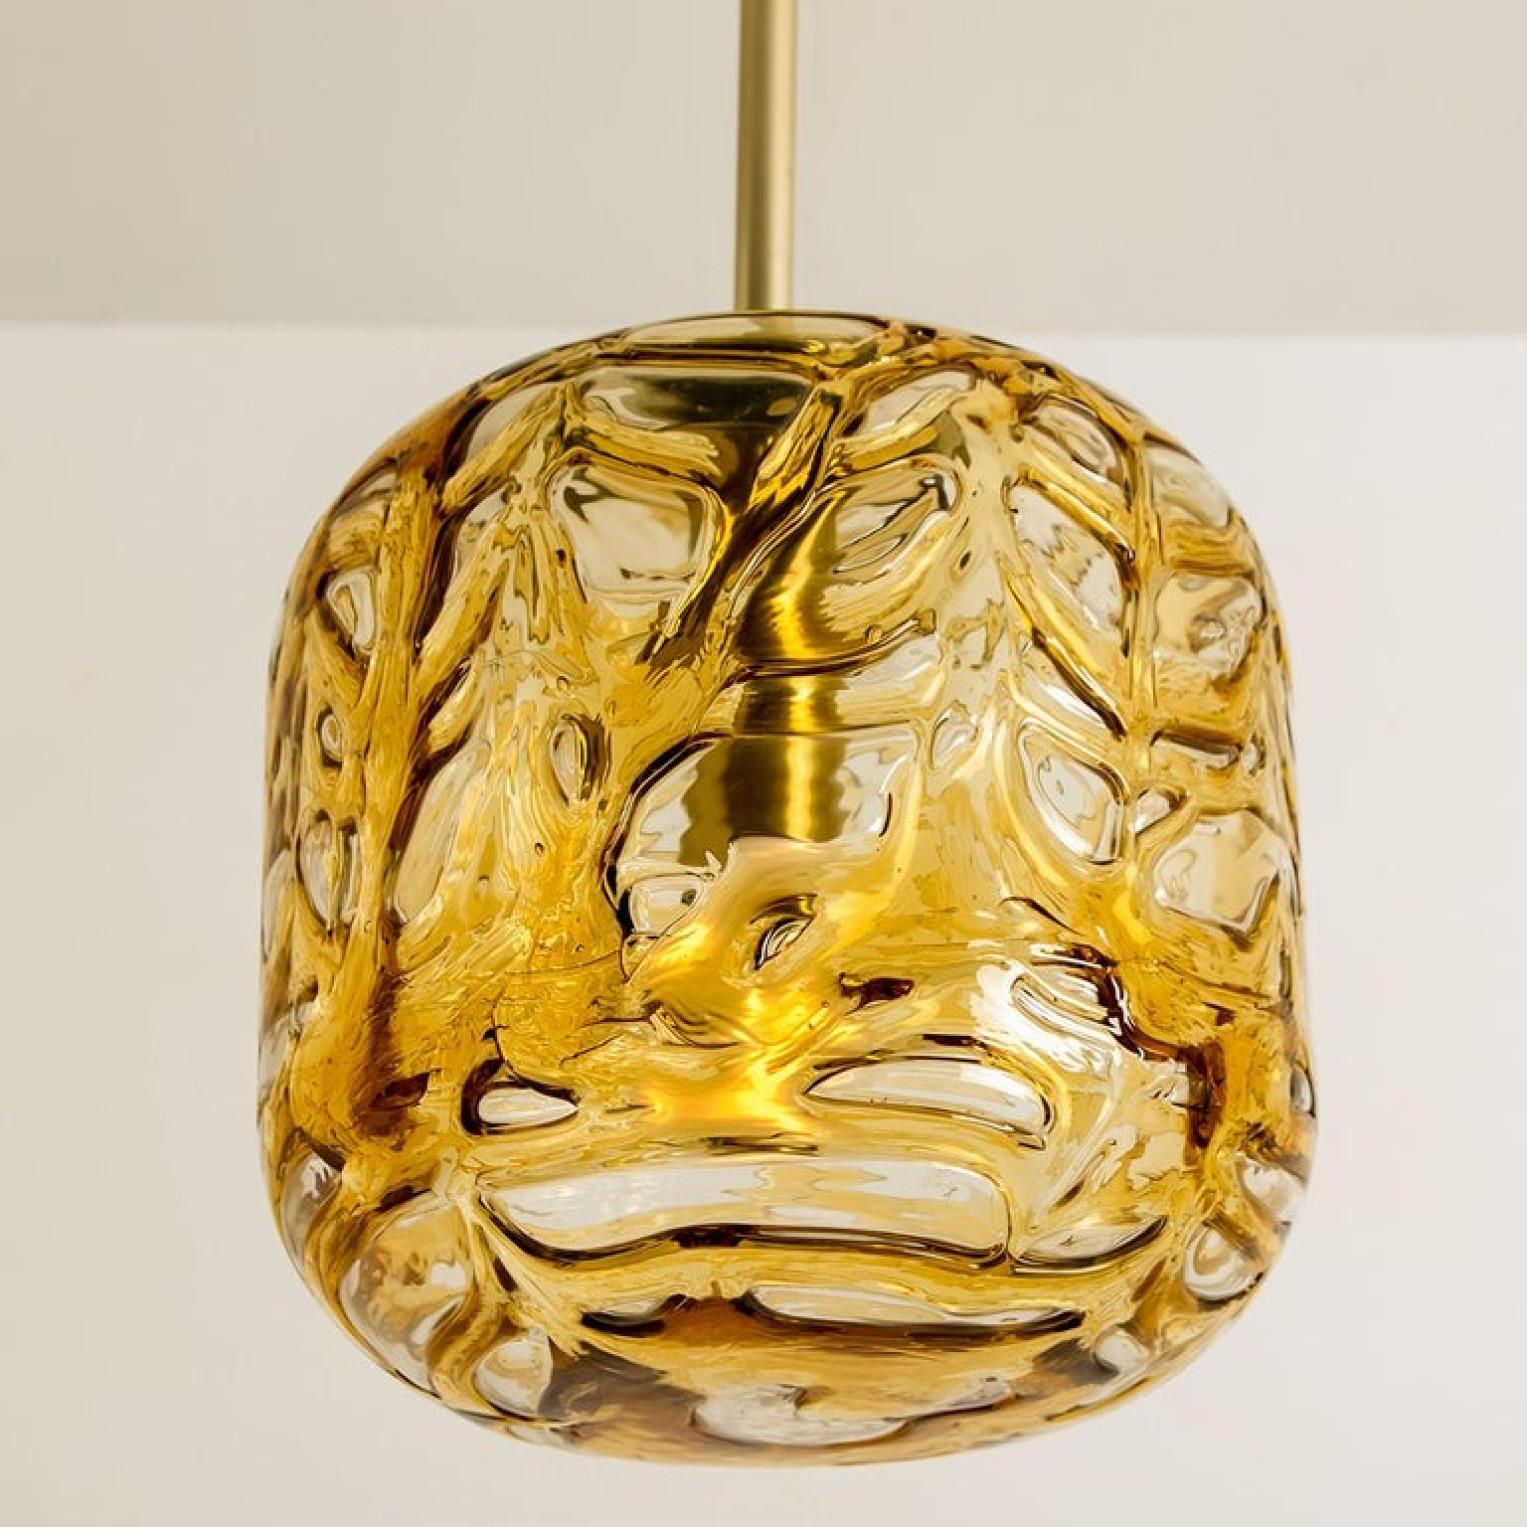 Exceptional Pair of Amber Murano Glass Pendant Lights Venini Style, 1970 For Sale 8